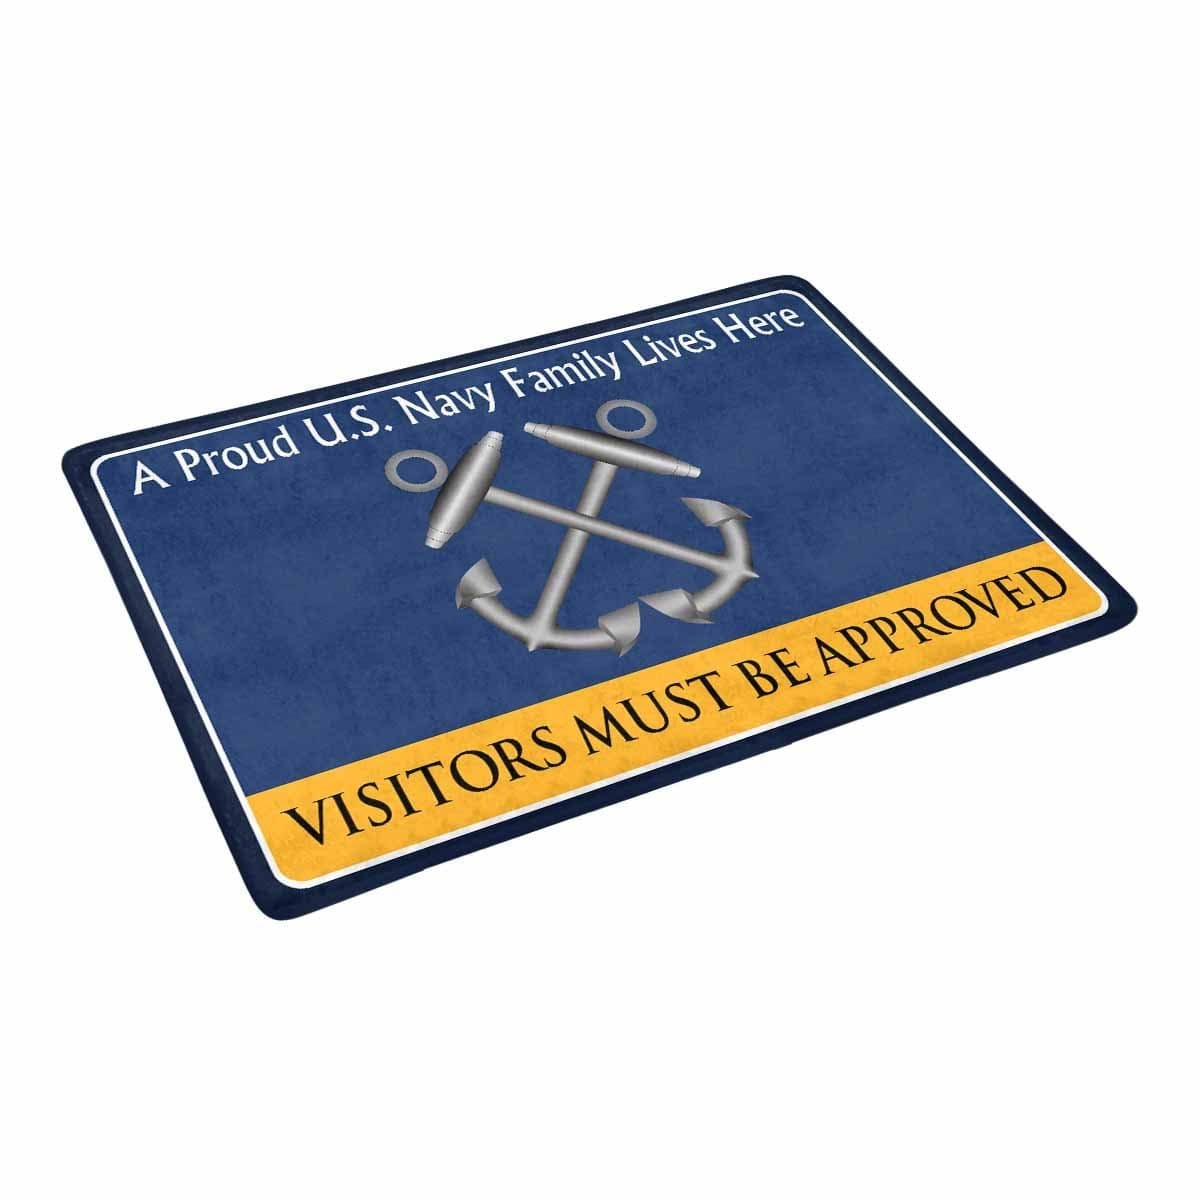 U.S Navy Boatswain's Mate Navy BM Family Doormat - Visitors must be approved (23,6 inches x 15,7 inches)-Doormat-Navy-Rate-Veterans Nation